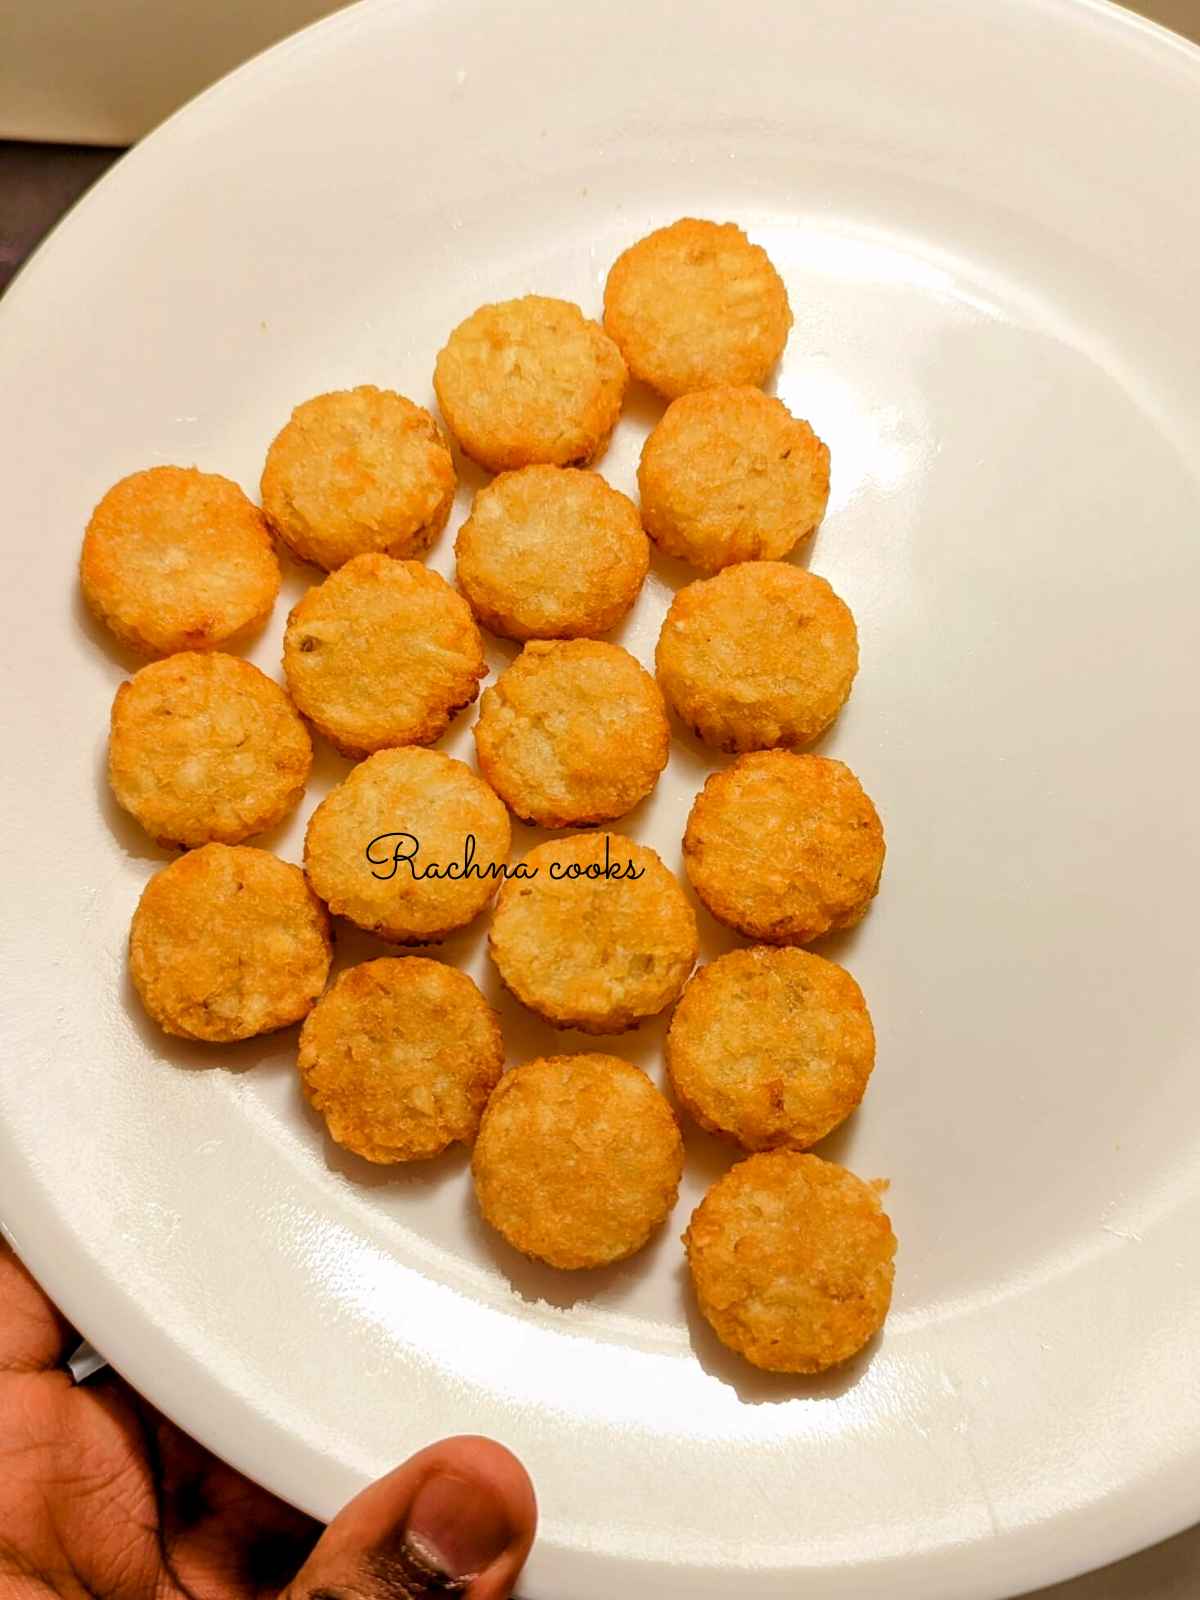 Ore Ida crispy crowns served after air frying on a white plate.